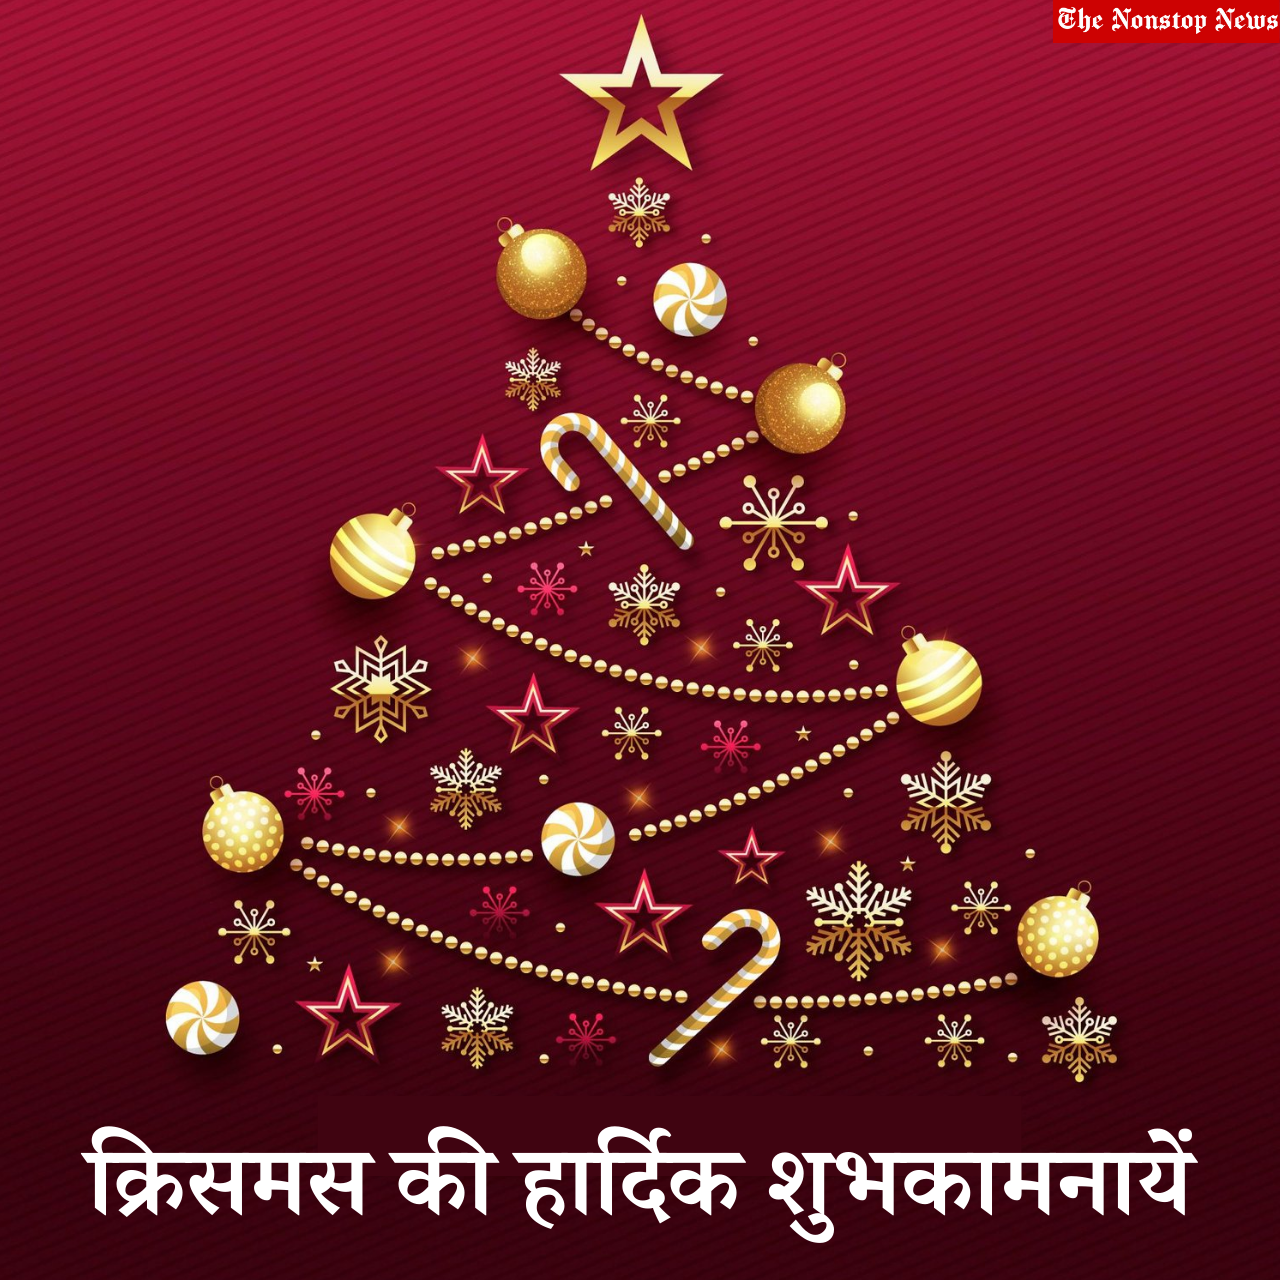 Happy Christmas 2021: Hindi Wishes, Greetings, Shayari, Messages, Quotes, Images, and Poster to share